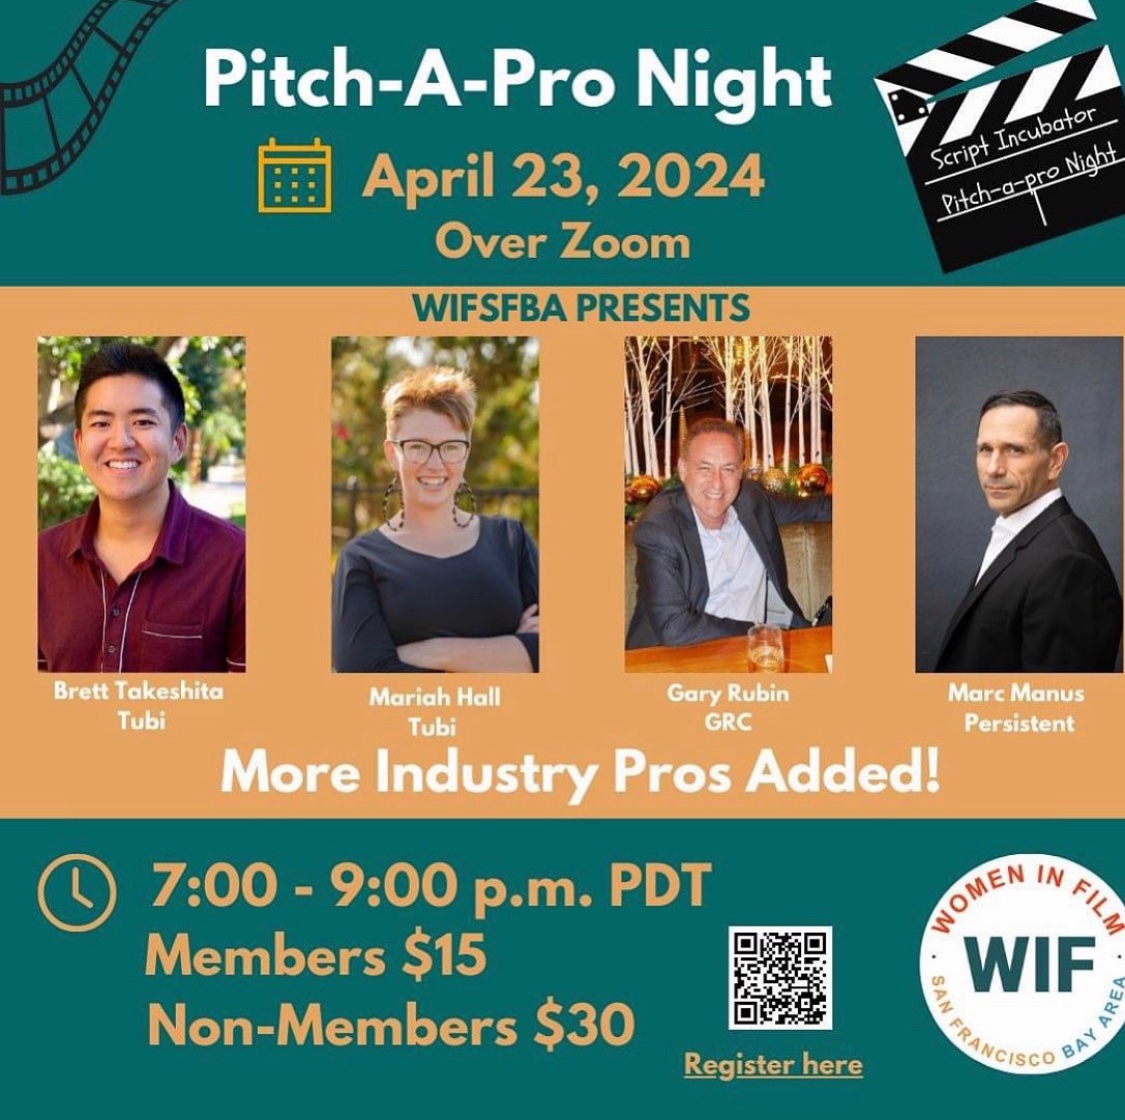 TONIGHT!! 
Women in Film San Francisco, Bay Area, PITCH-A-PRO Night
Deadline to register is 12:00 noon on Tuesday, April 23rd.
Register here: wifsfba.org

Tuesday, April 23rd, 2024, 7-9pm (Virtual on Zoom)
$15 WIFSBA Members
$30 Non-members #wifsfba